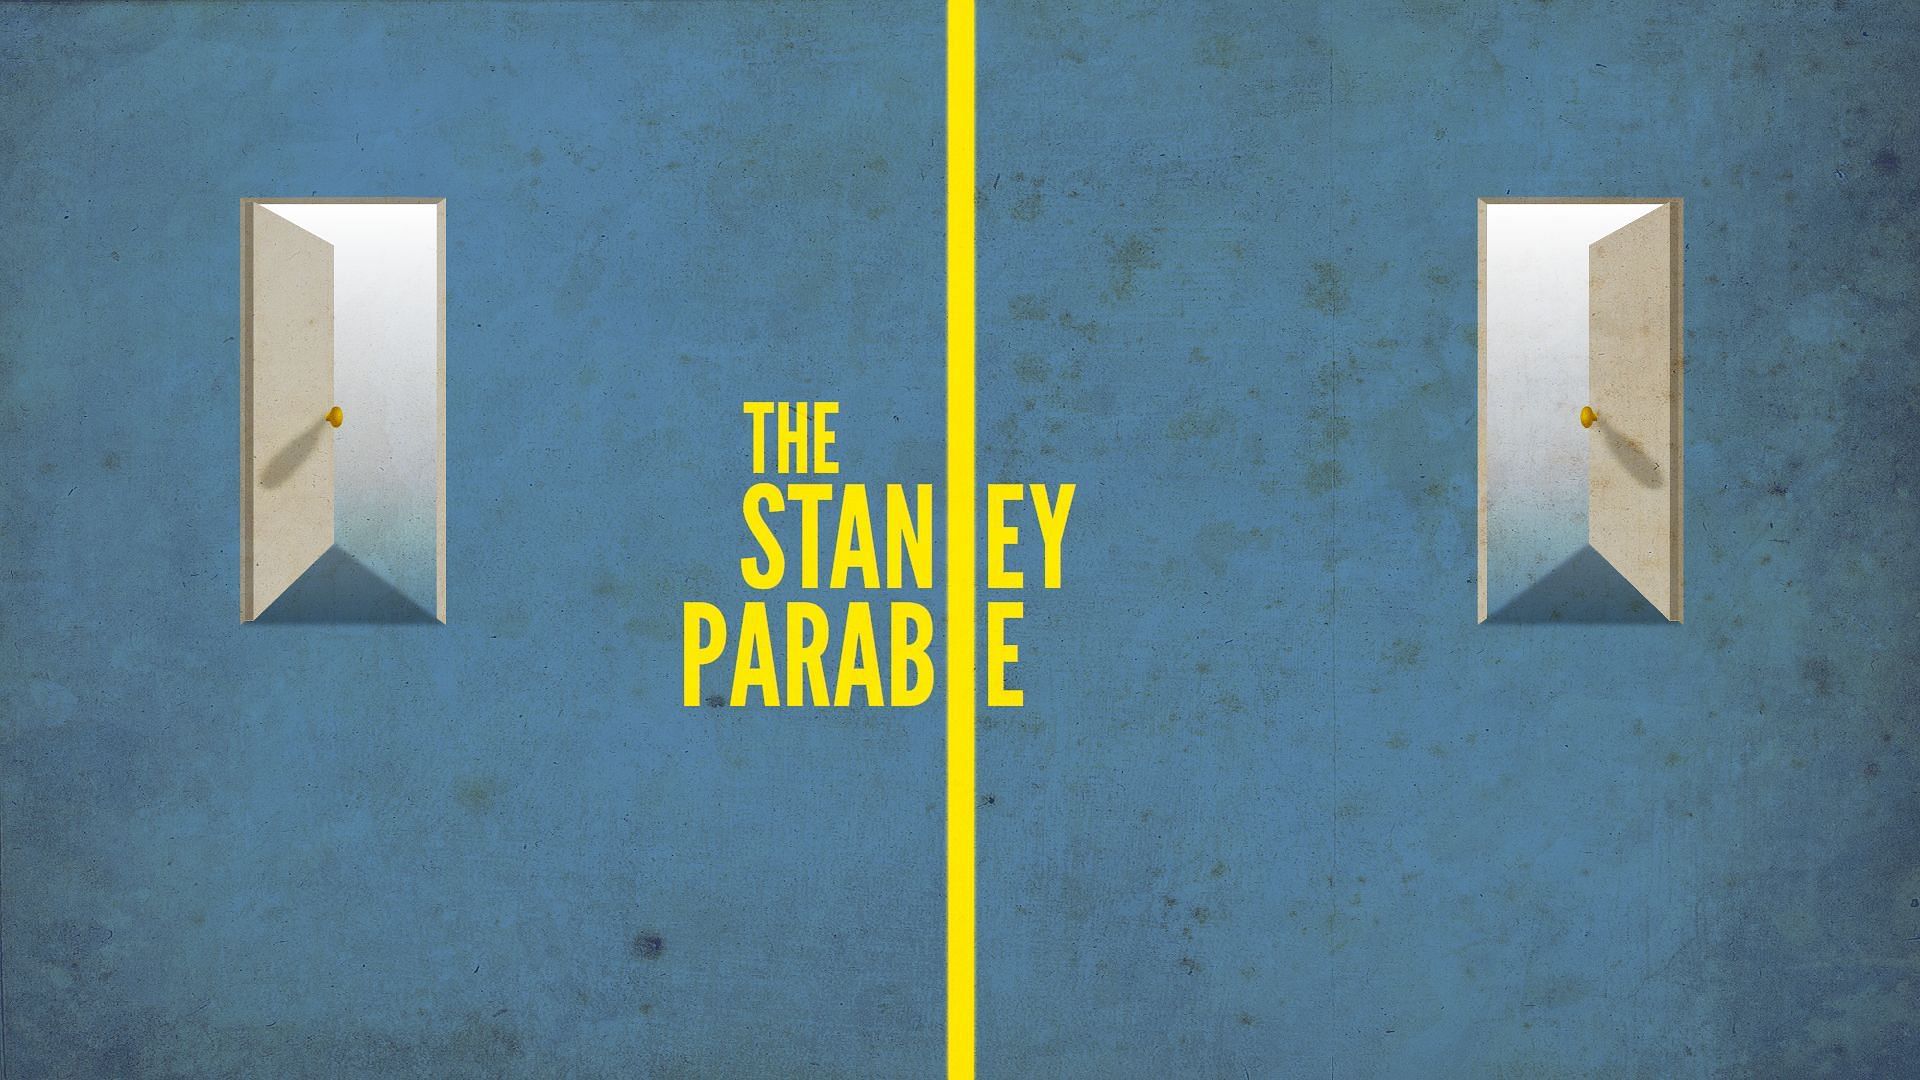 Exciting interactive walking simulator (Images via The Stanley Parable)